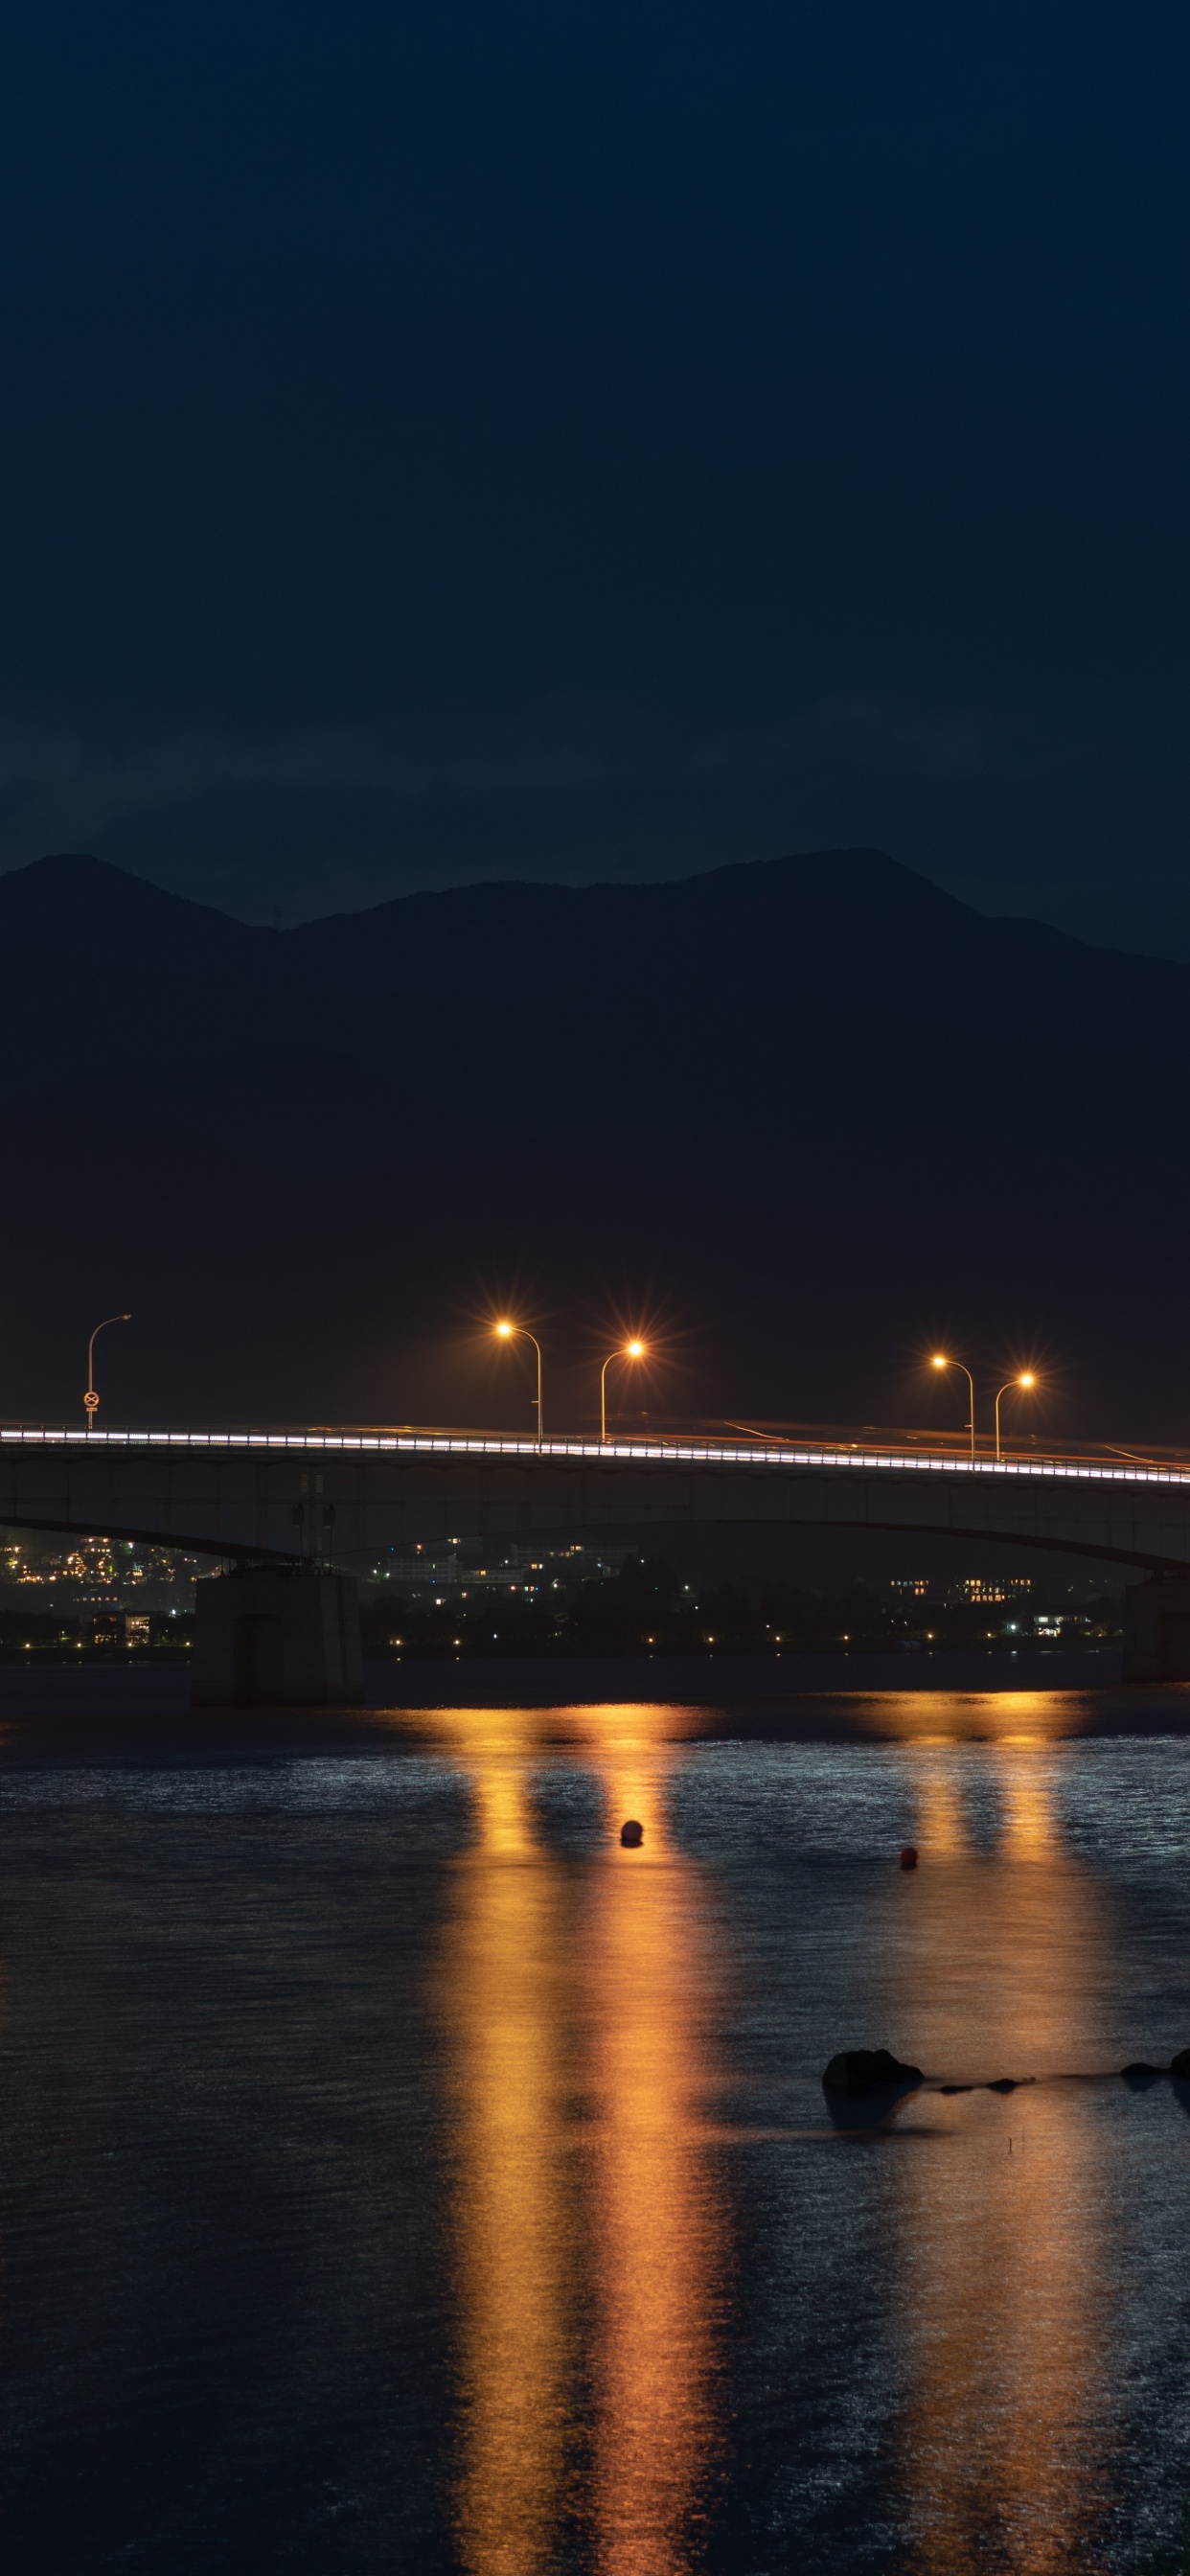 Lighted Bridge Over Water During Night Time. Wallpaper in 1242x2688 Resolution